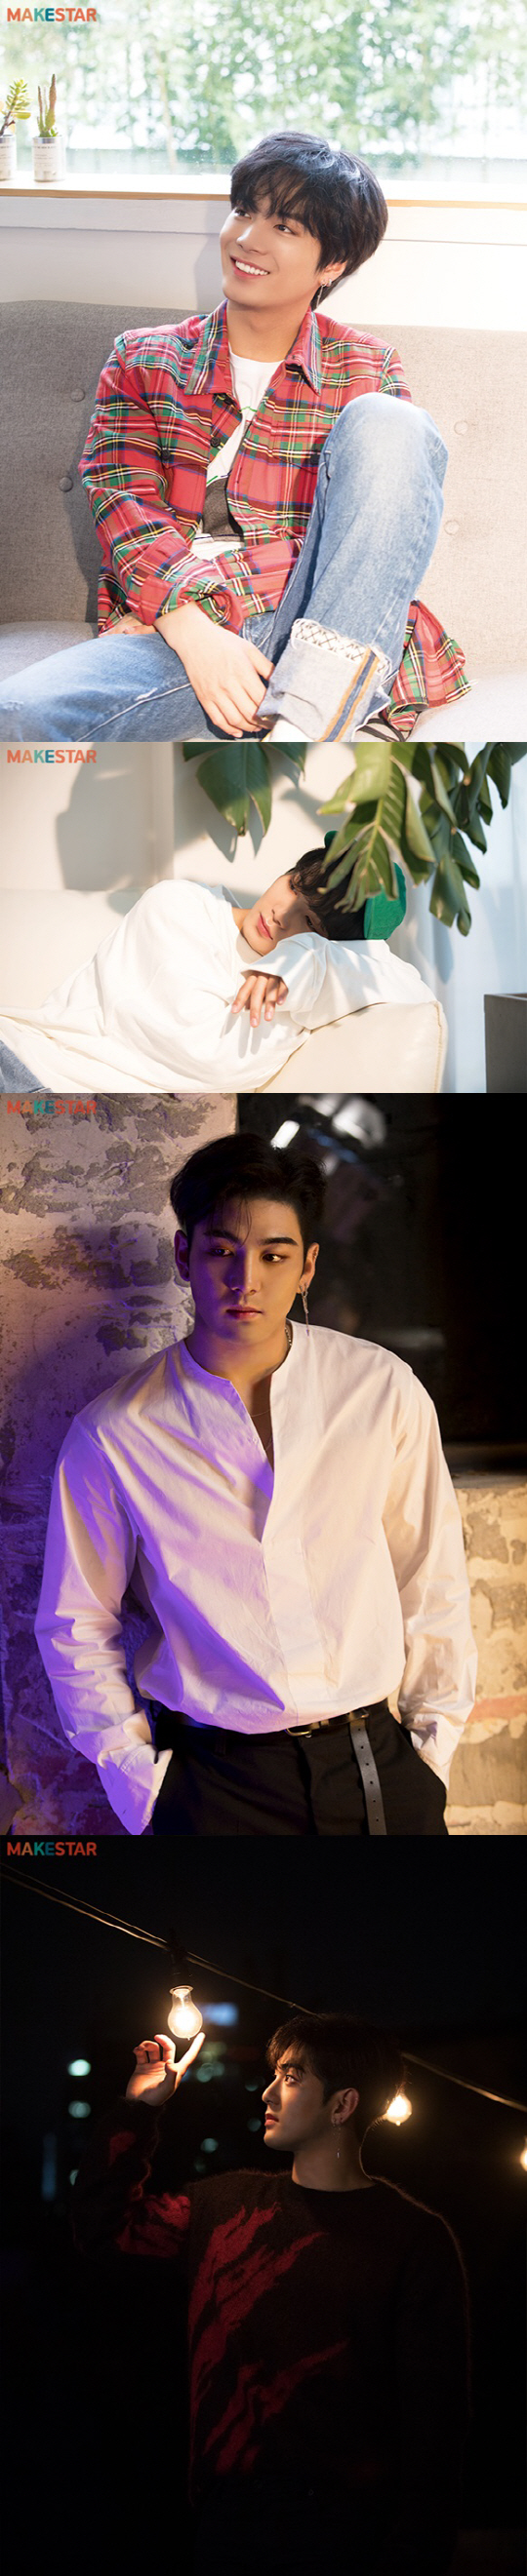 NUEST W Baekho (gang dong-ho) and JR (Kim Jonghyeon) showed off their unique charm.Makestar unveiled the pictures of Baekho and JRs SteelSeries cut on the 31st.The SteelSeries cut is a steelSeries cut by Jonghyun, which contains the freshness and purity of the somewhat contradictory Feelings with the SteelSeries cut of Baekho, which contains mysterious and sexy Feelings.The NUEST W special photo book, which is planned and produced by Make Star, is a project conducted as a result of a vote for Produce 101 trainees last summer.It is known that it reflects the opinions of fans around the world who love NUEST W in the overall production process from the concept, title and design of the photo book.Make Star Kim Jae-myeon said, It is no exaggeration to say that the NUEST W picture book is the best cut collection of the NUEST W members.The various atmosphere of the members in the concept of daily life decided by reflecting the opinions of the fans will be a good gift for NUEST W fans around the world. NUEST Ws photo book project will be held on September 10th at the global entertainment content platform Make Star by pre-sale method, and members steel Series cuts and making teaser videos will be released until the project is over.